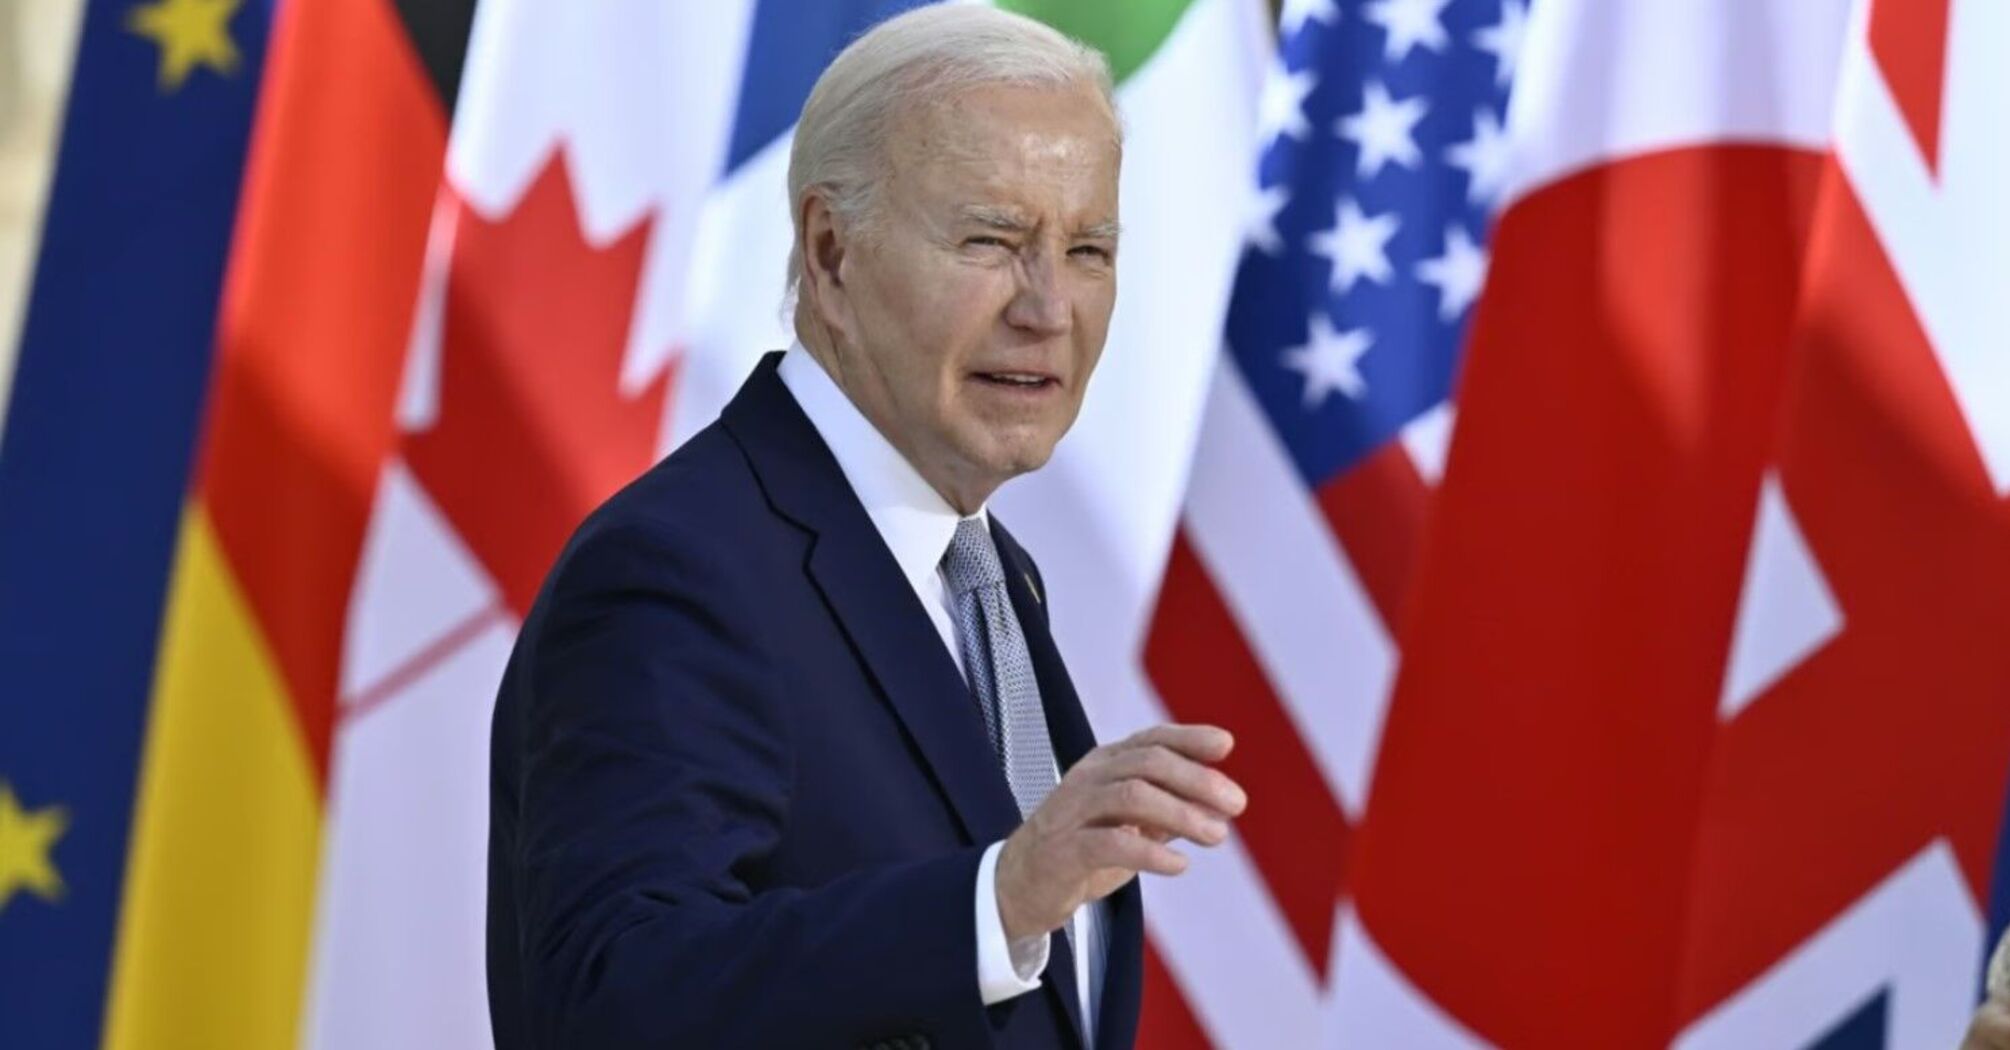 Five countries will provide Ukraine with more Patriot systems - Biden